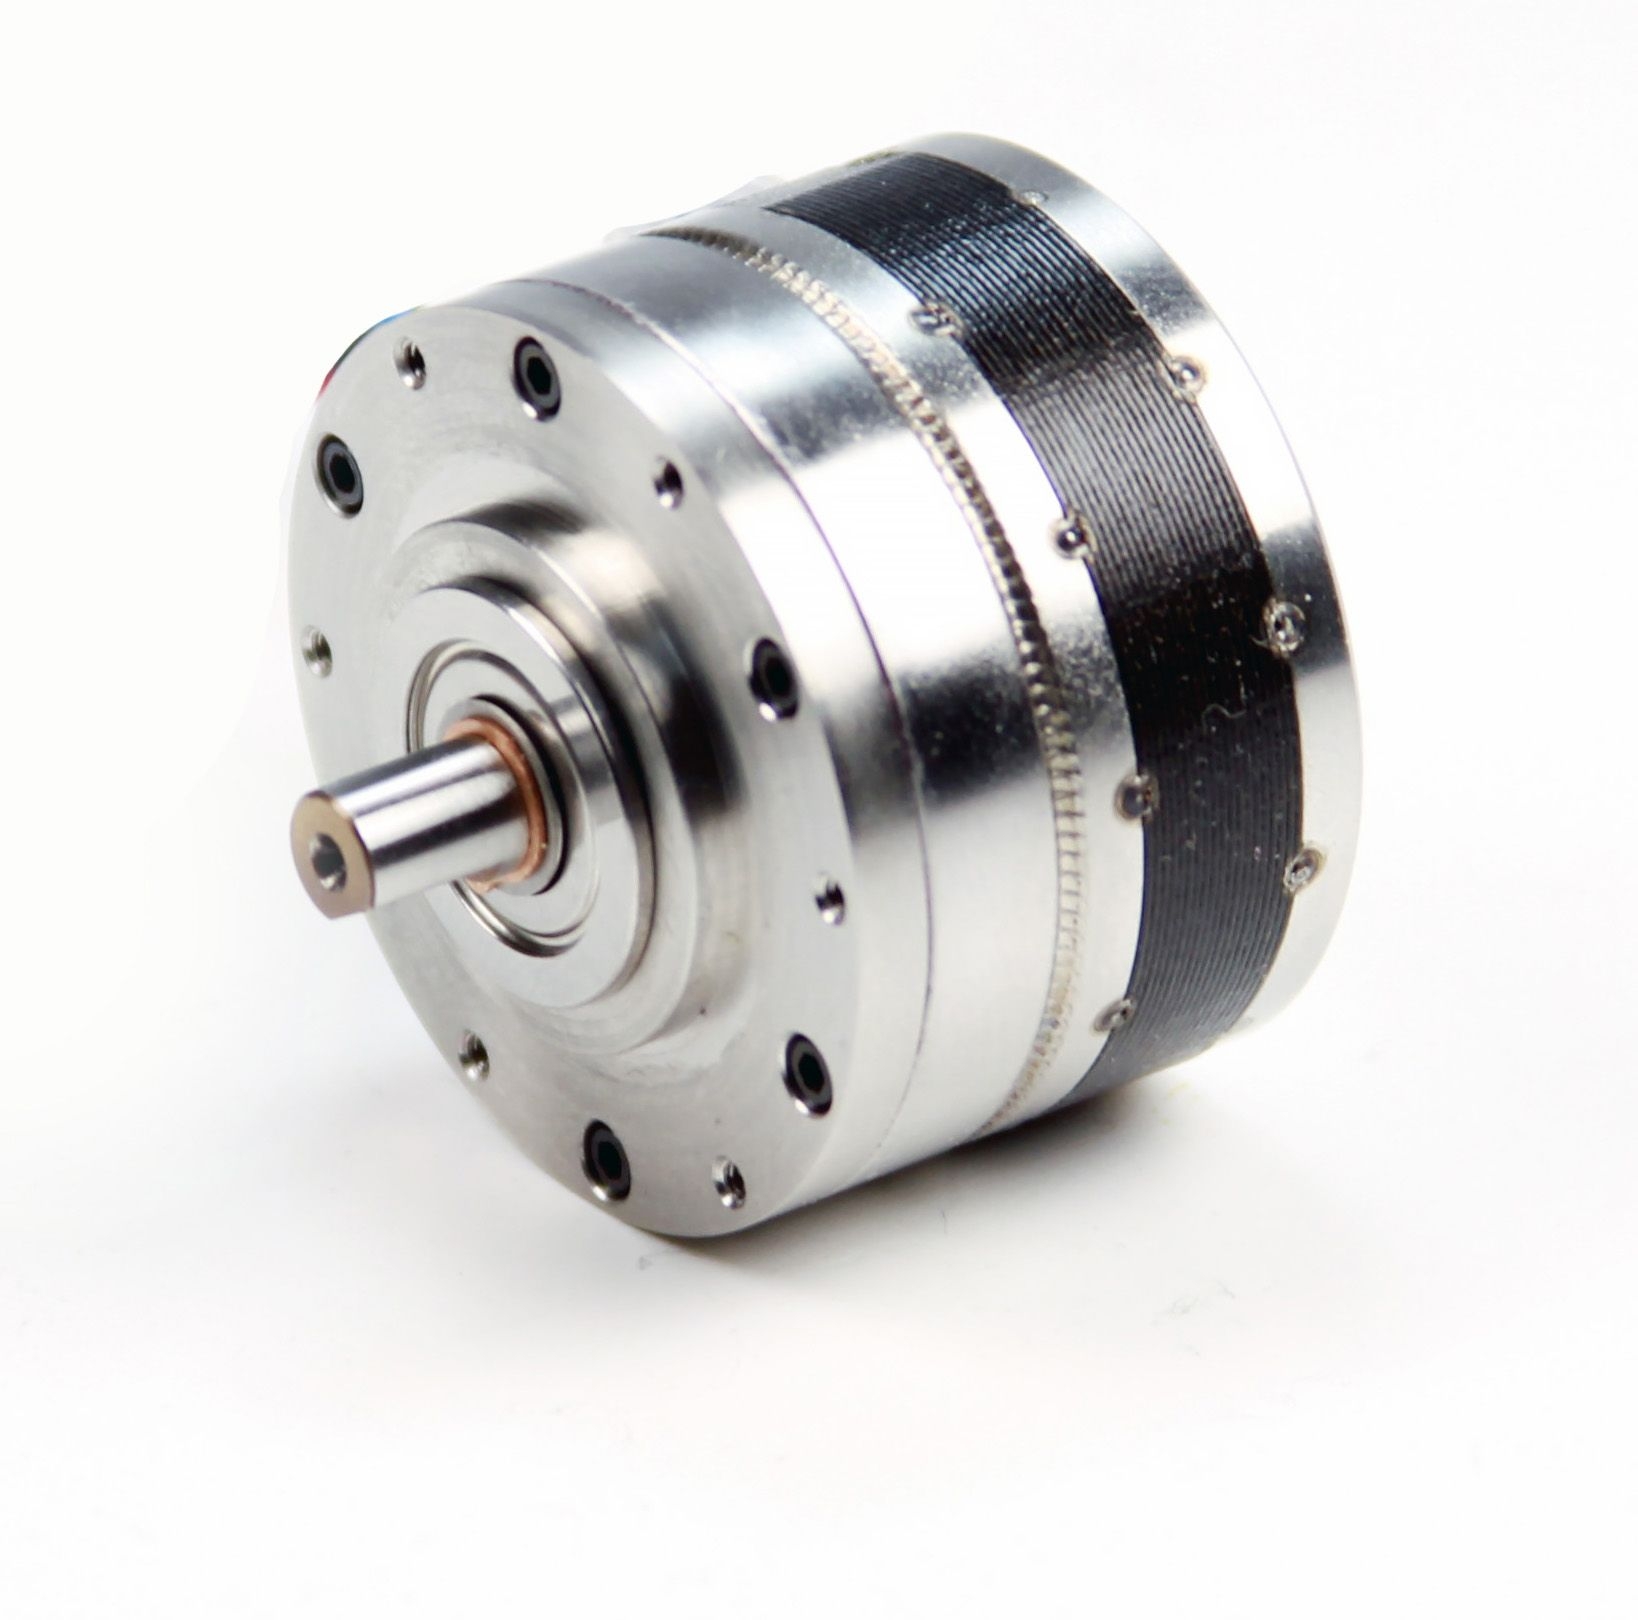 Ultra-Slim Stepper Motor with 11:1 Integrated Gearbox